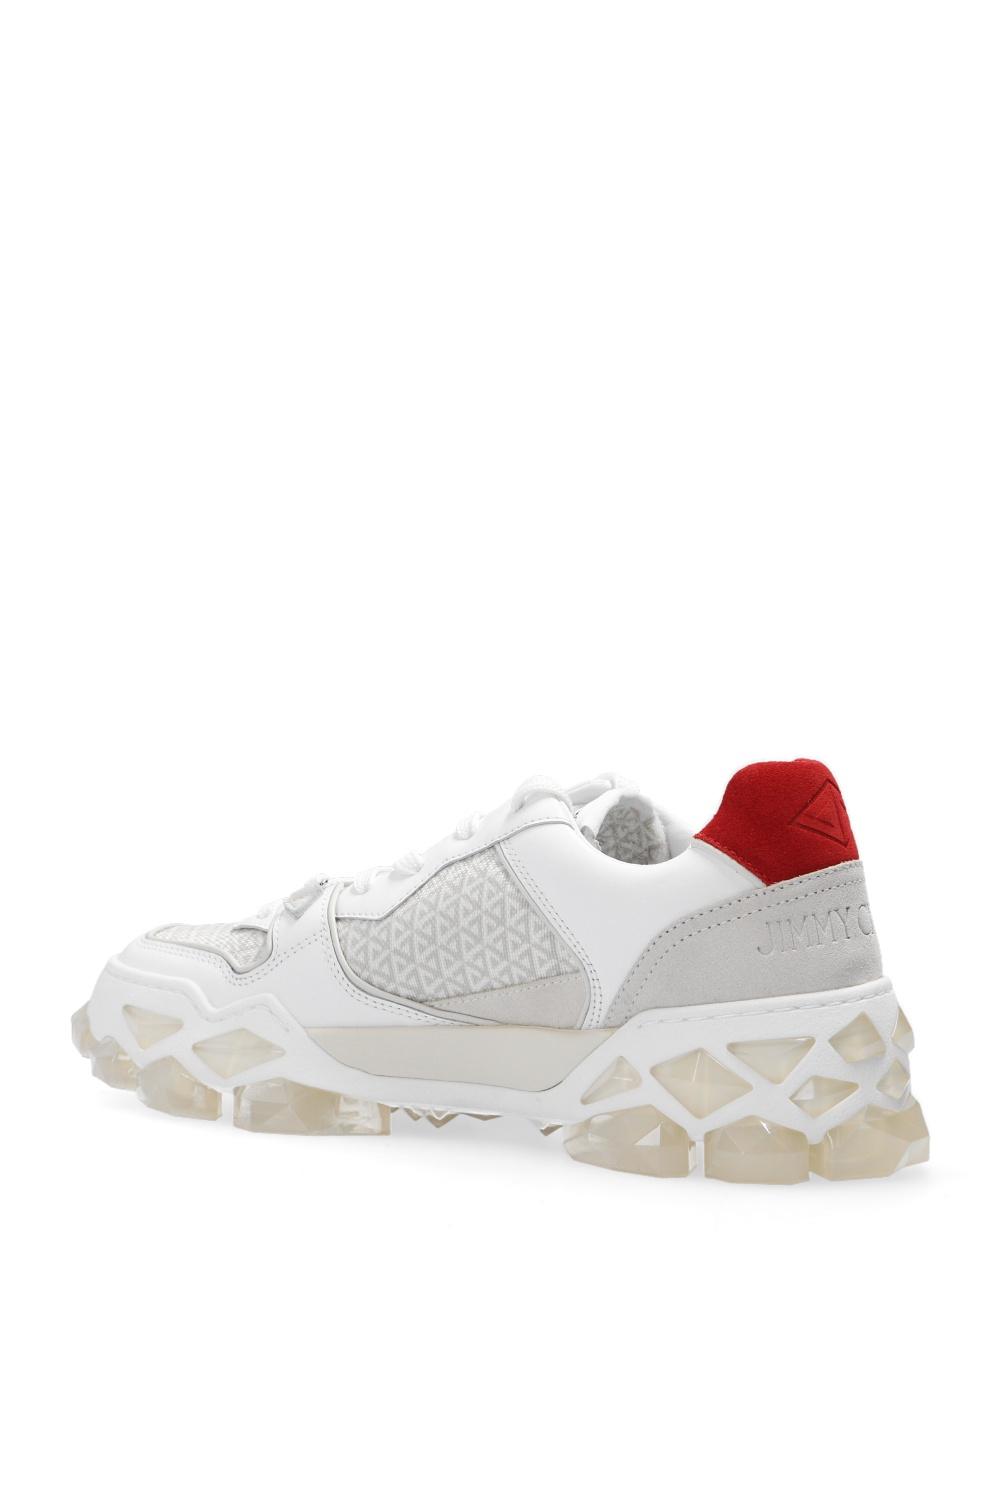 Jimmy Choo Leather 'diamond X Trainer' Sneakers in White for Men 